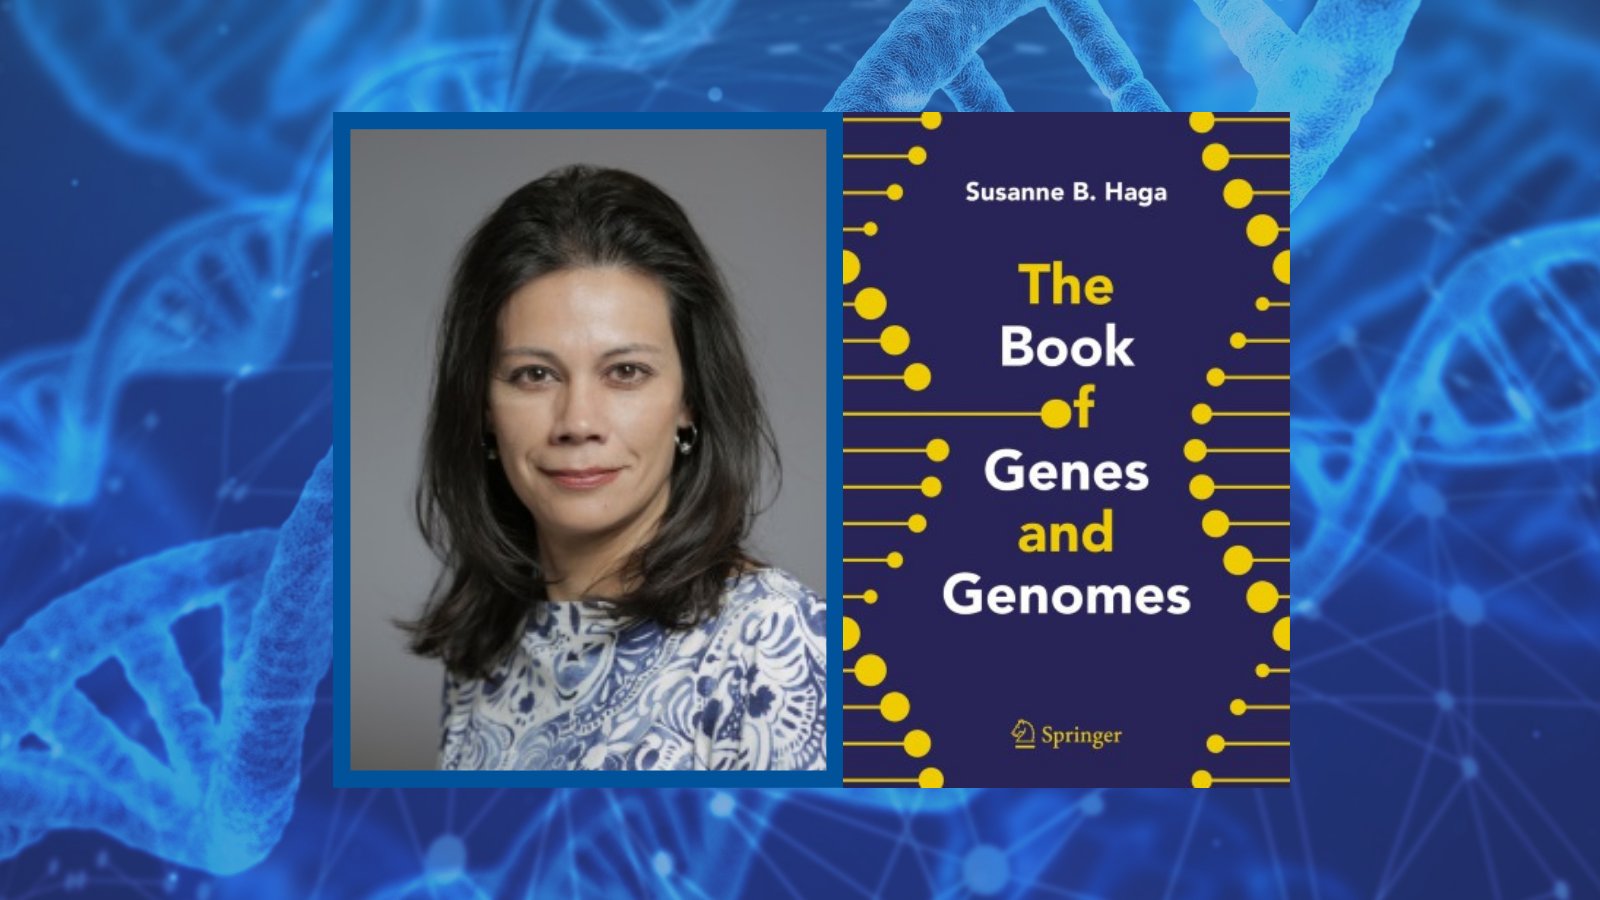 Susanne Haga and her book, The Book of Genes and Genomes